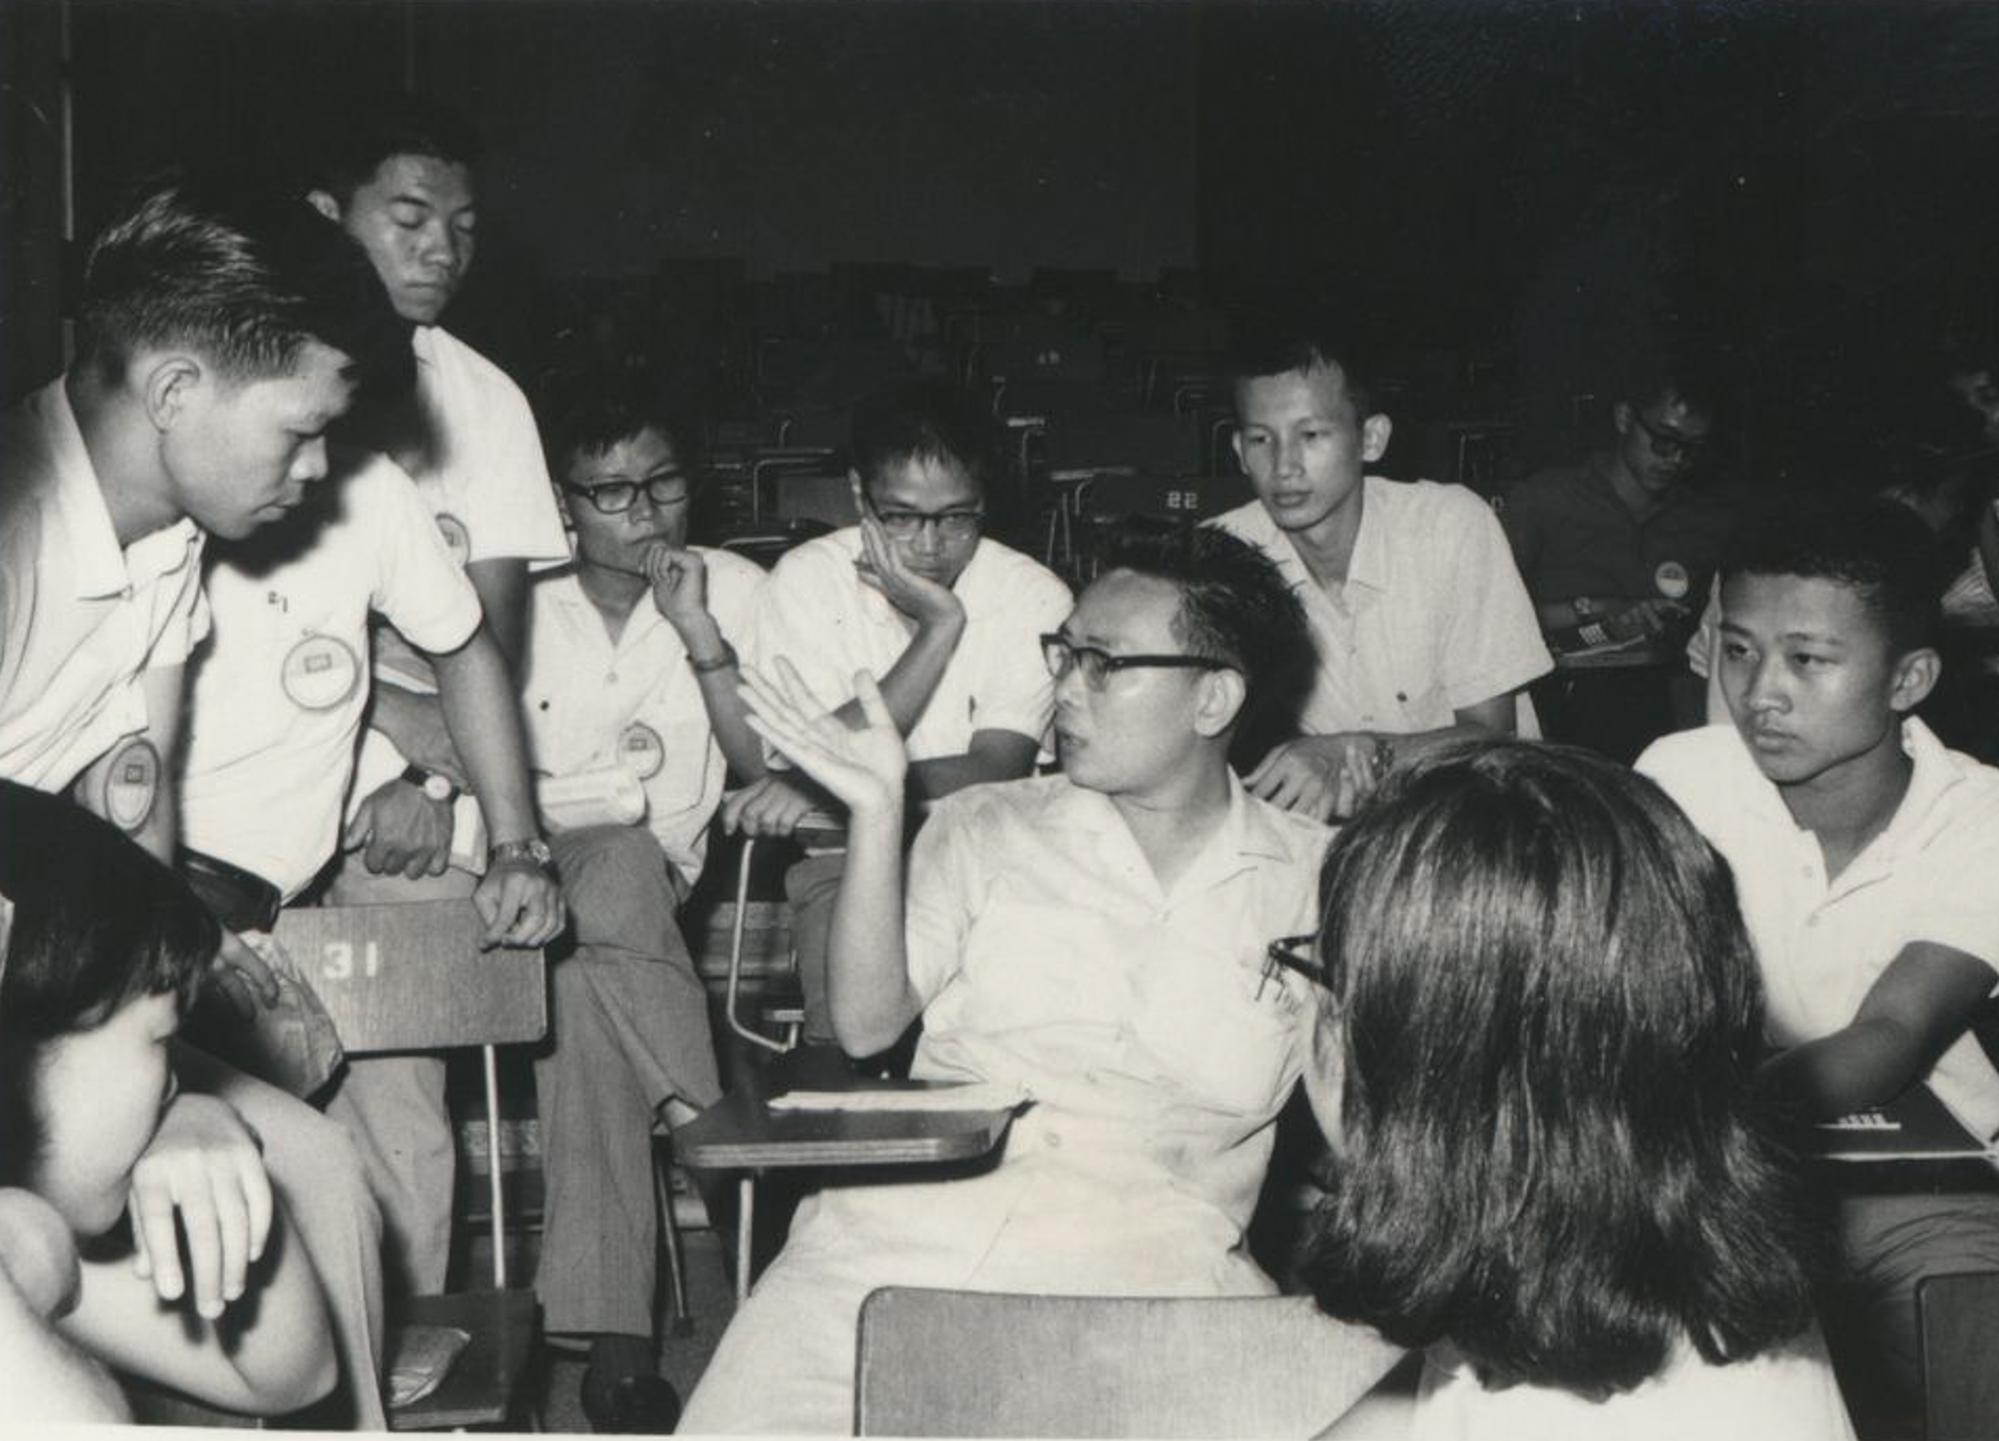 In 1966, Professor Yi-Yan Li (李怡嚴) (center) lecturing to students.